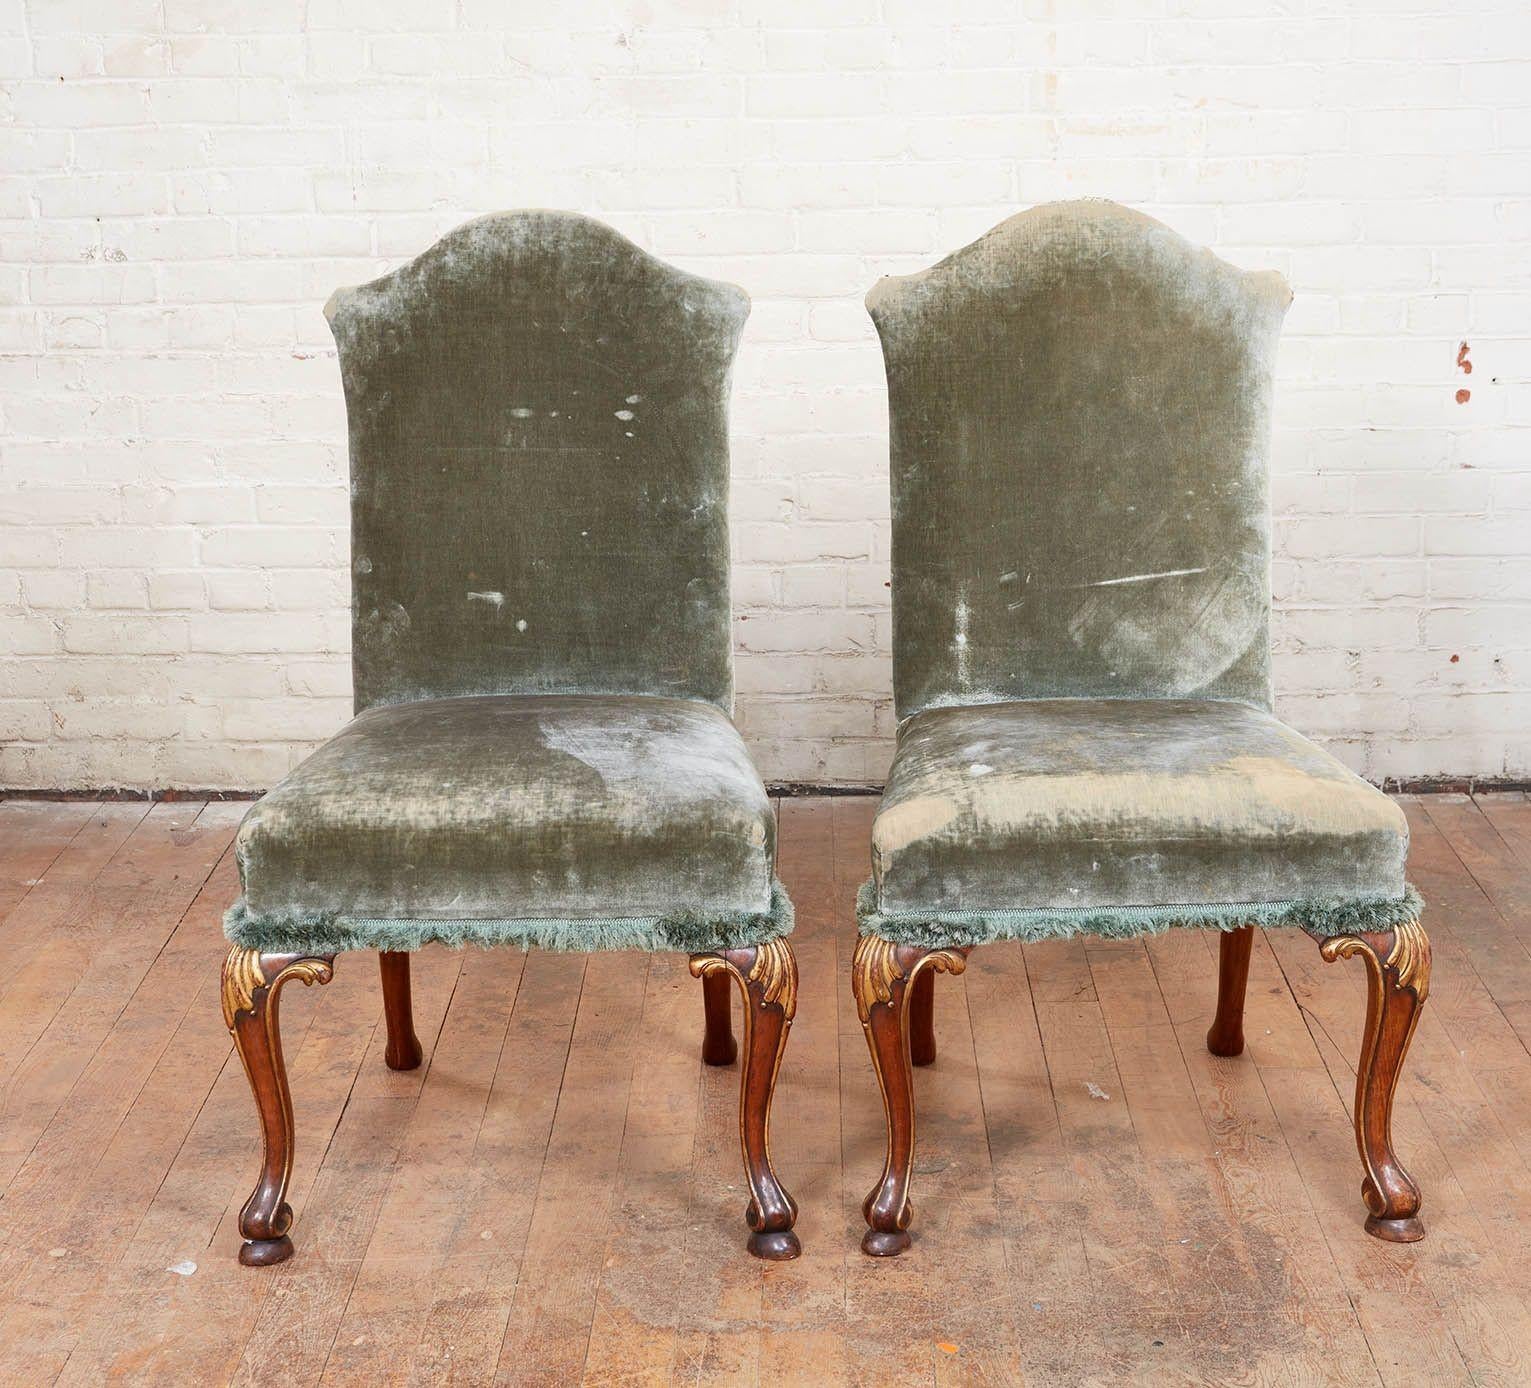 Fine pair of George I style walnut and parcel gilt side chairs, the over upholstered seats below arched backs and standing on carved cabriole legs with gilt knees and standing on scrolled feet with gilt edges, the chairs currently upholstered in